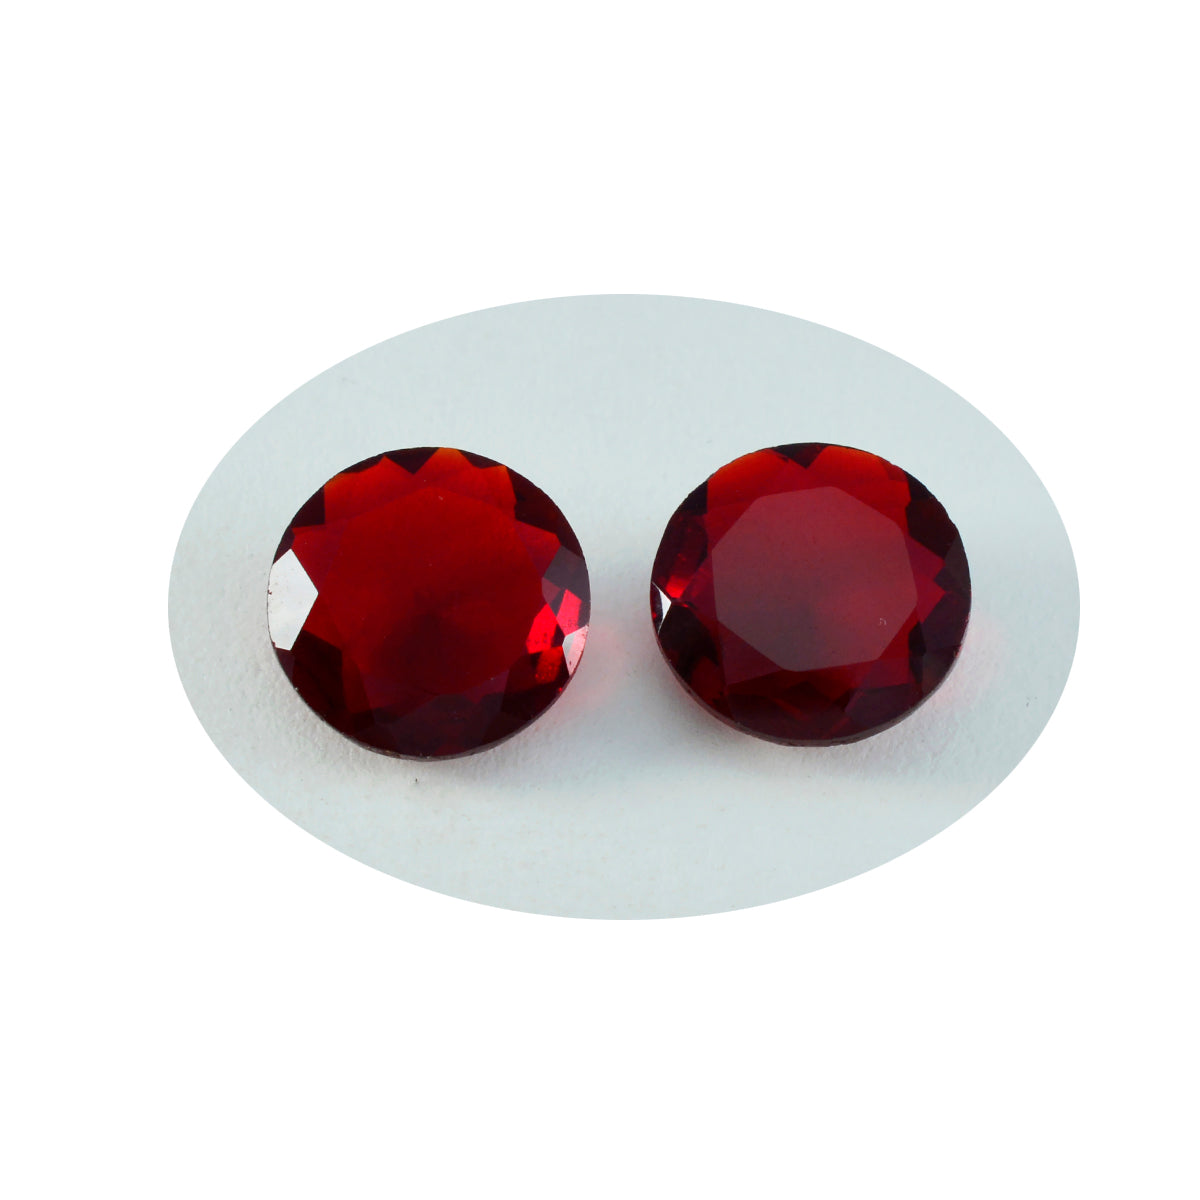 Riyogems 1PC Red Ruby CZ Faceted 14x14 mm Round Shape excellent Quality Loose Gem